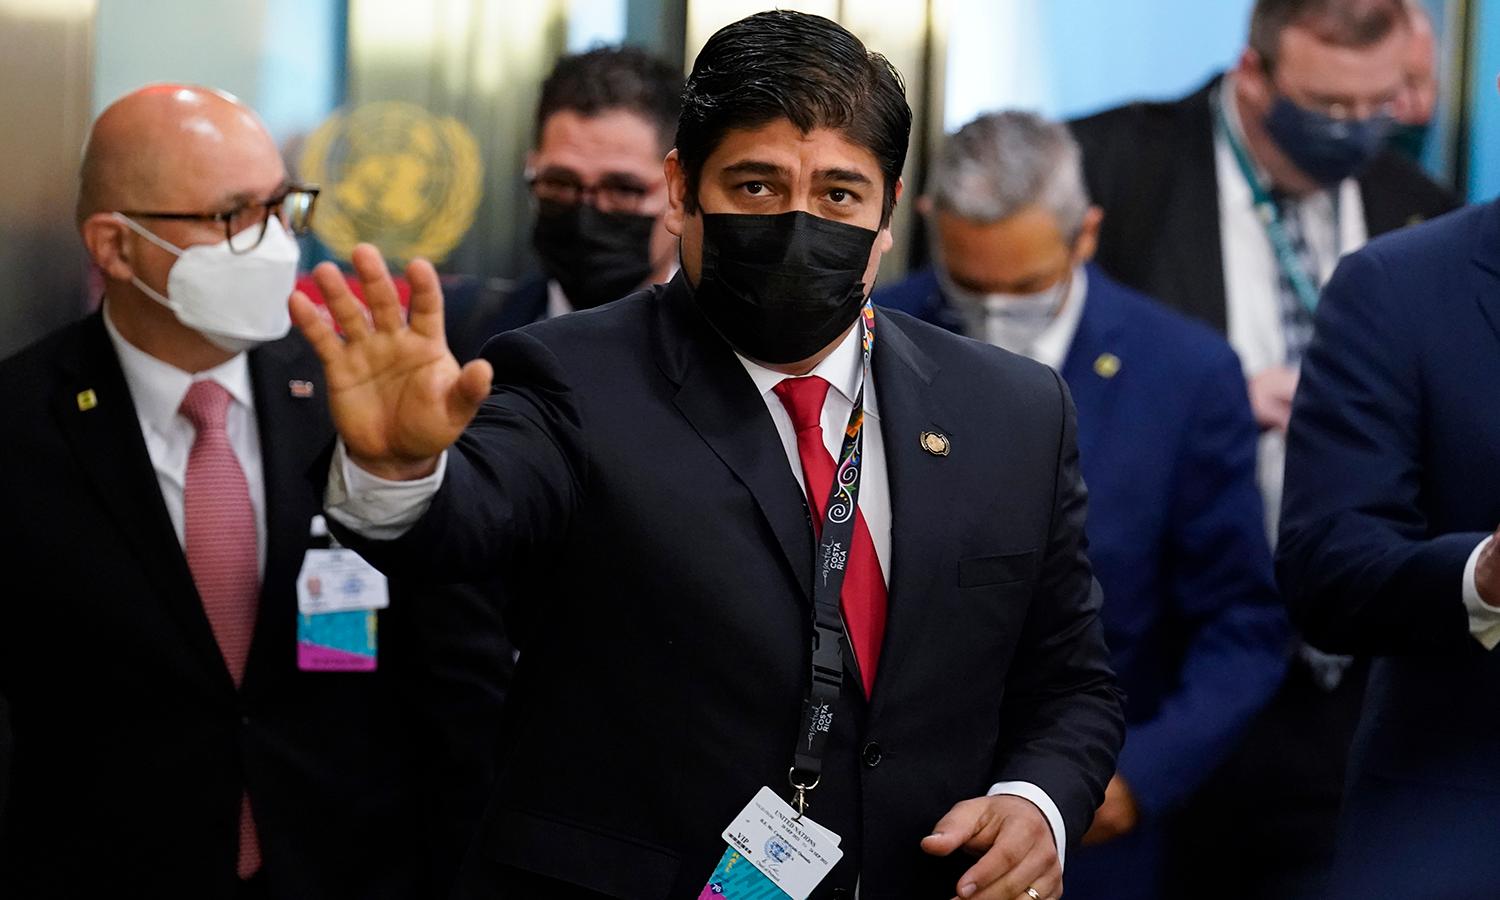 Costa Rican President Carlos Alvarado Quesada arrives at United Nations headquarters during the 76th Session of the U.N. General Assembly on Sept. 21, 2021, in New York City. The Conti ransomware group recently disrupted Costa Rica&#8217;s government computers. (Photo by John Minchillo/Pool via Getty Images)